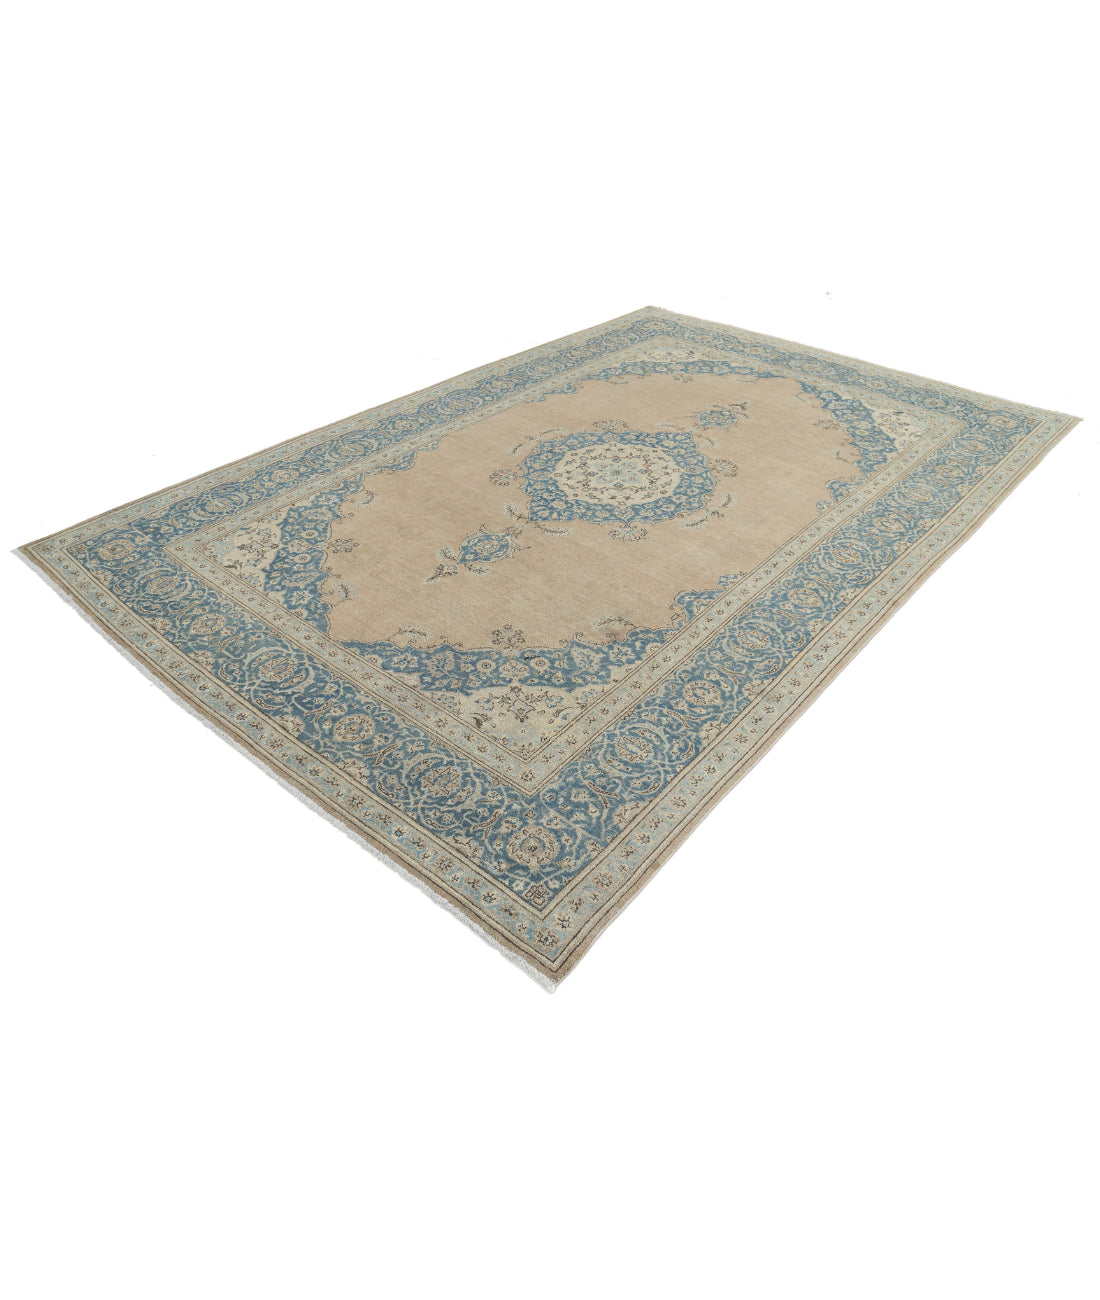 Hand Knotted Vintage Persian Tabriz Wool Rug - 7'4'' x 11'1'' 7'4'' x 11'1'' (220 X 333) / Taupe / Blue